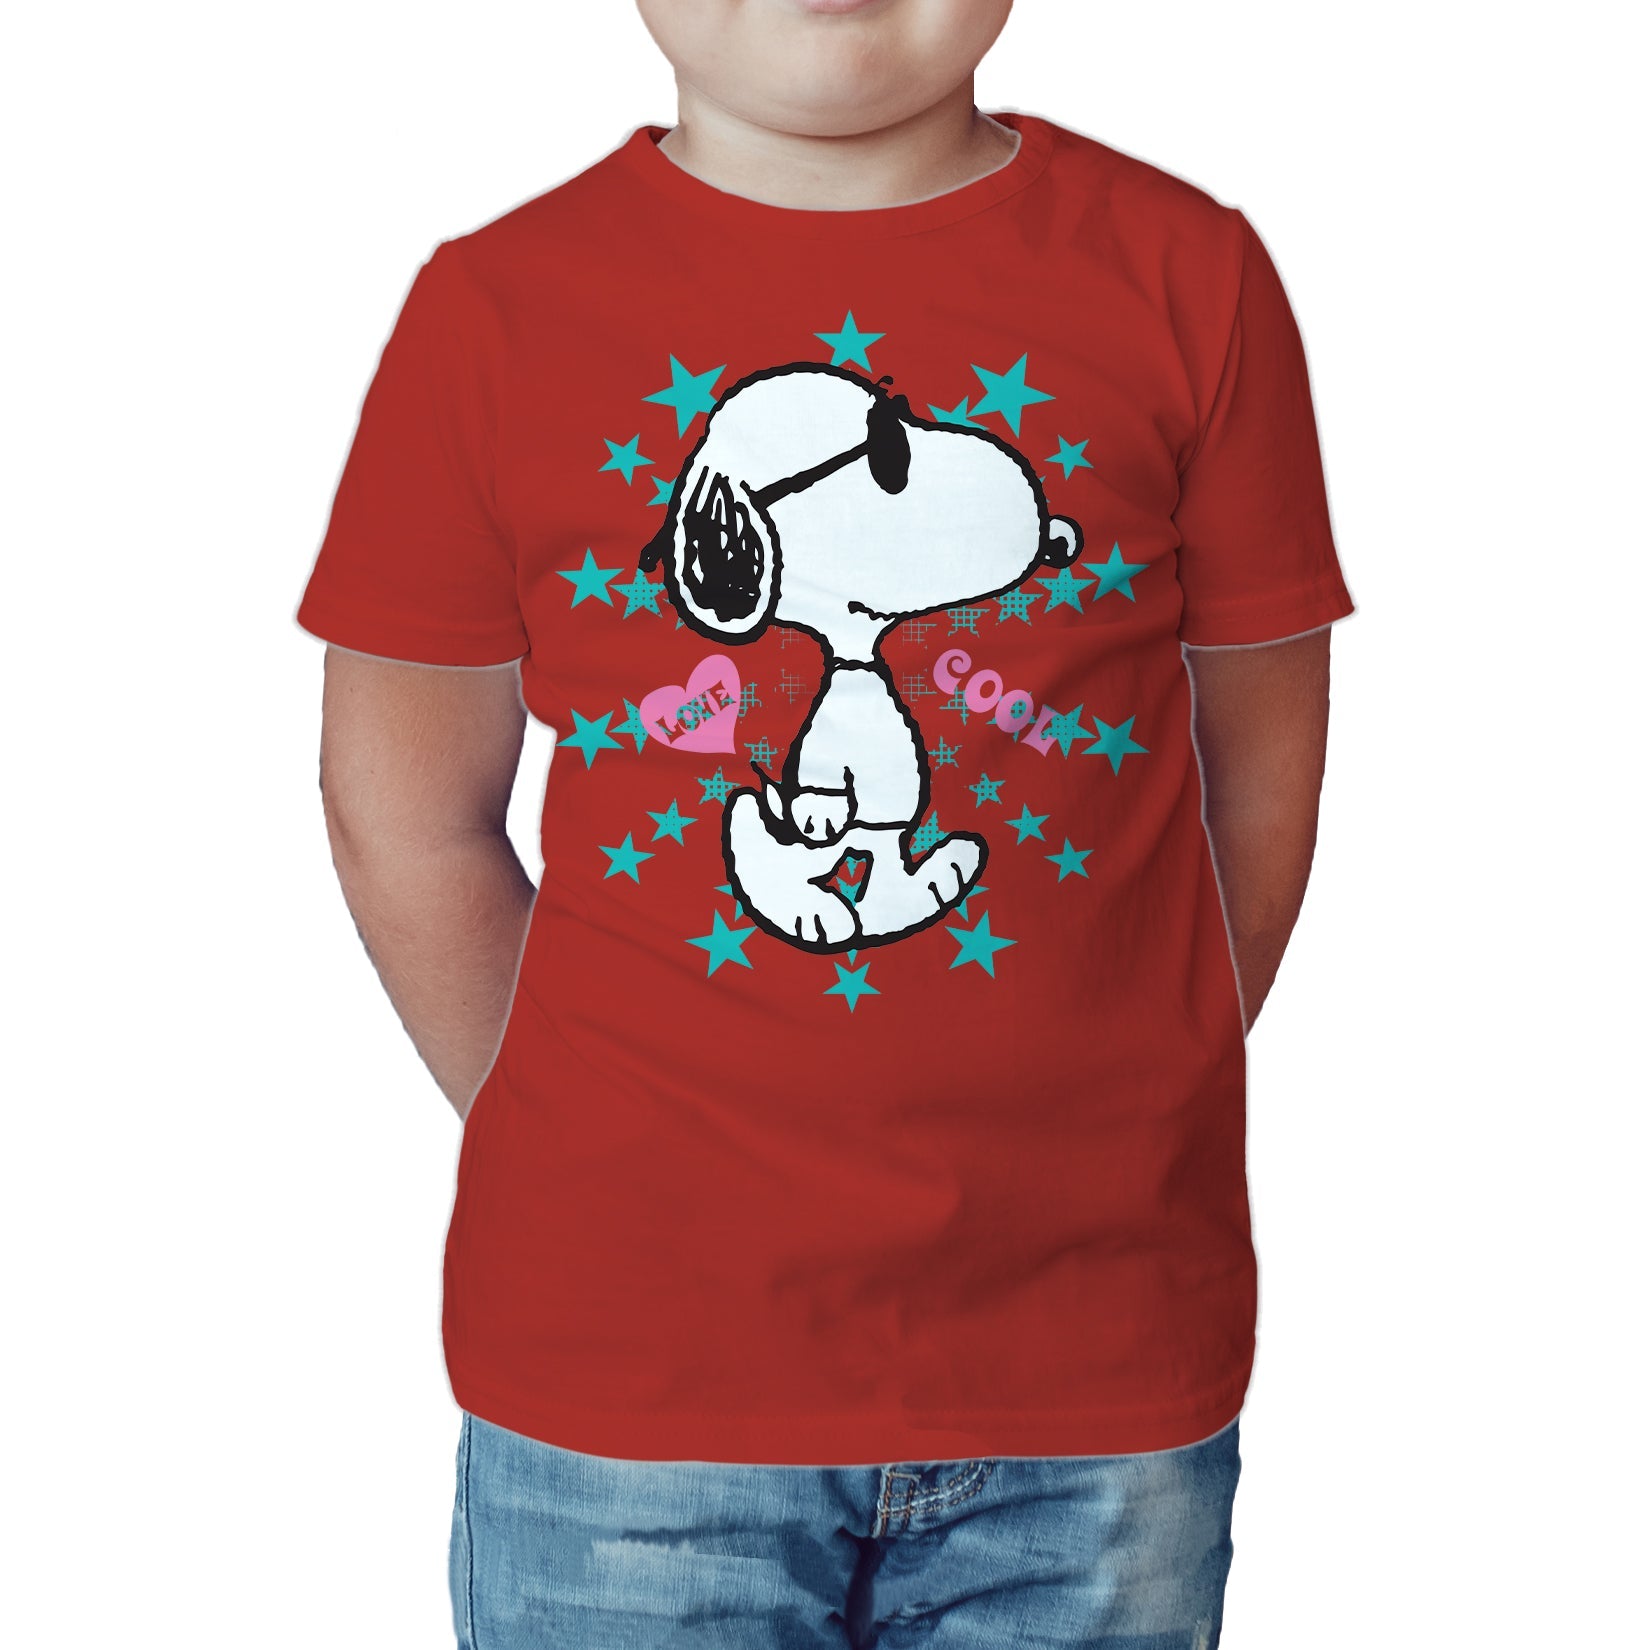 Peanuts Kids Snoopy Cool Official Kid's T-Shirt